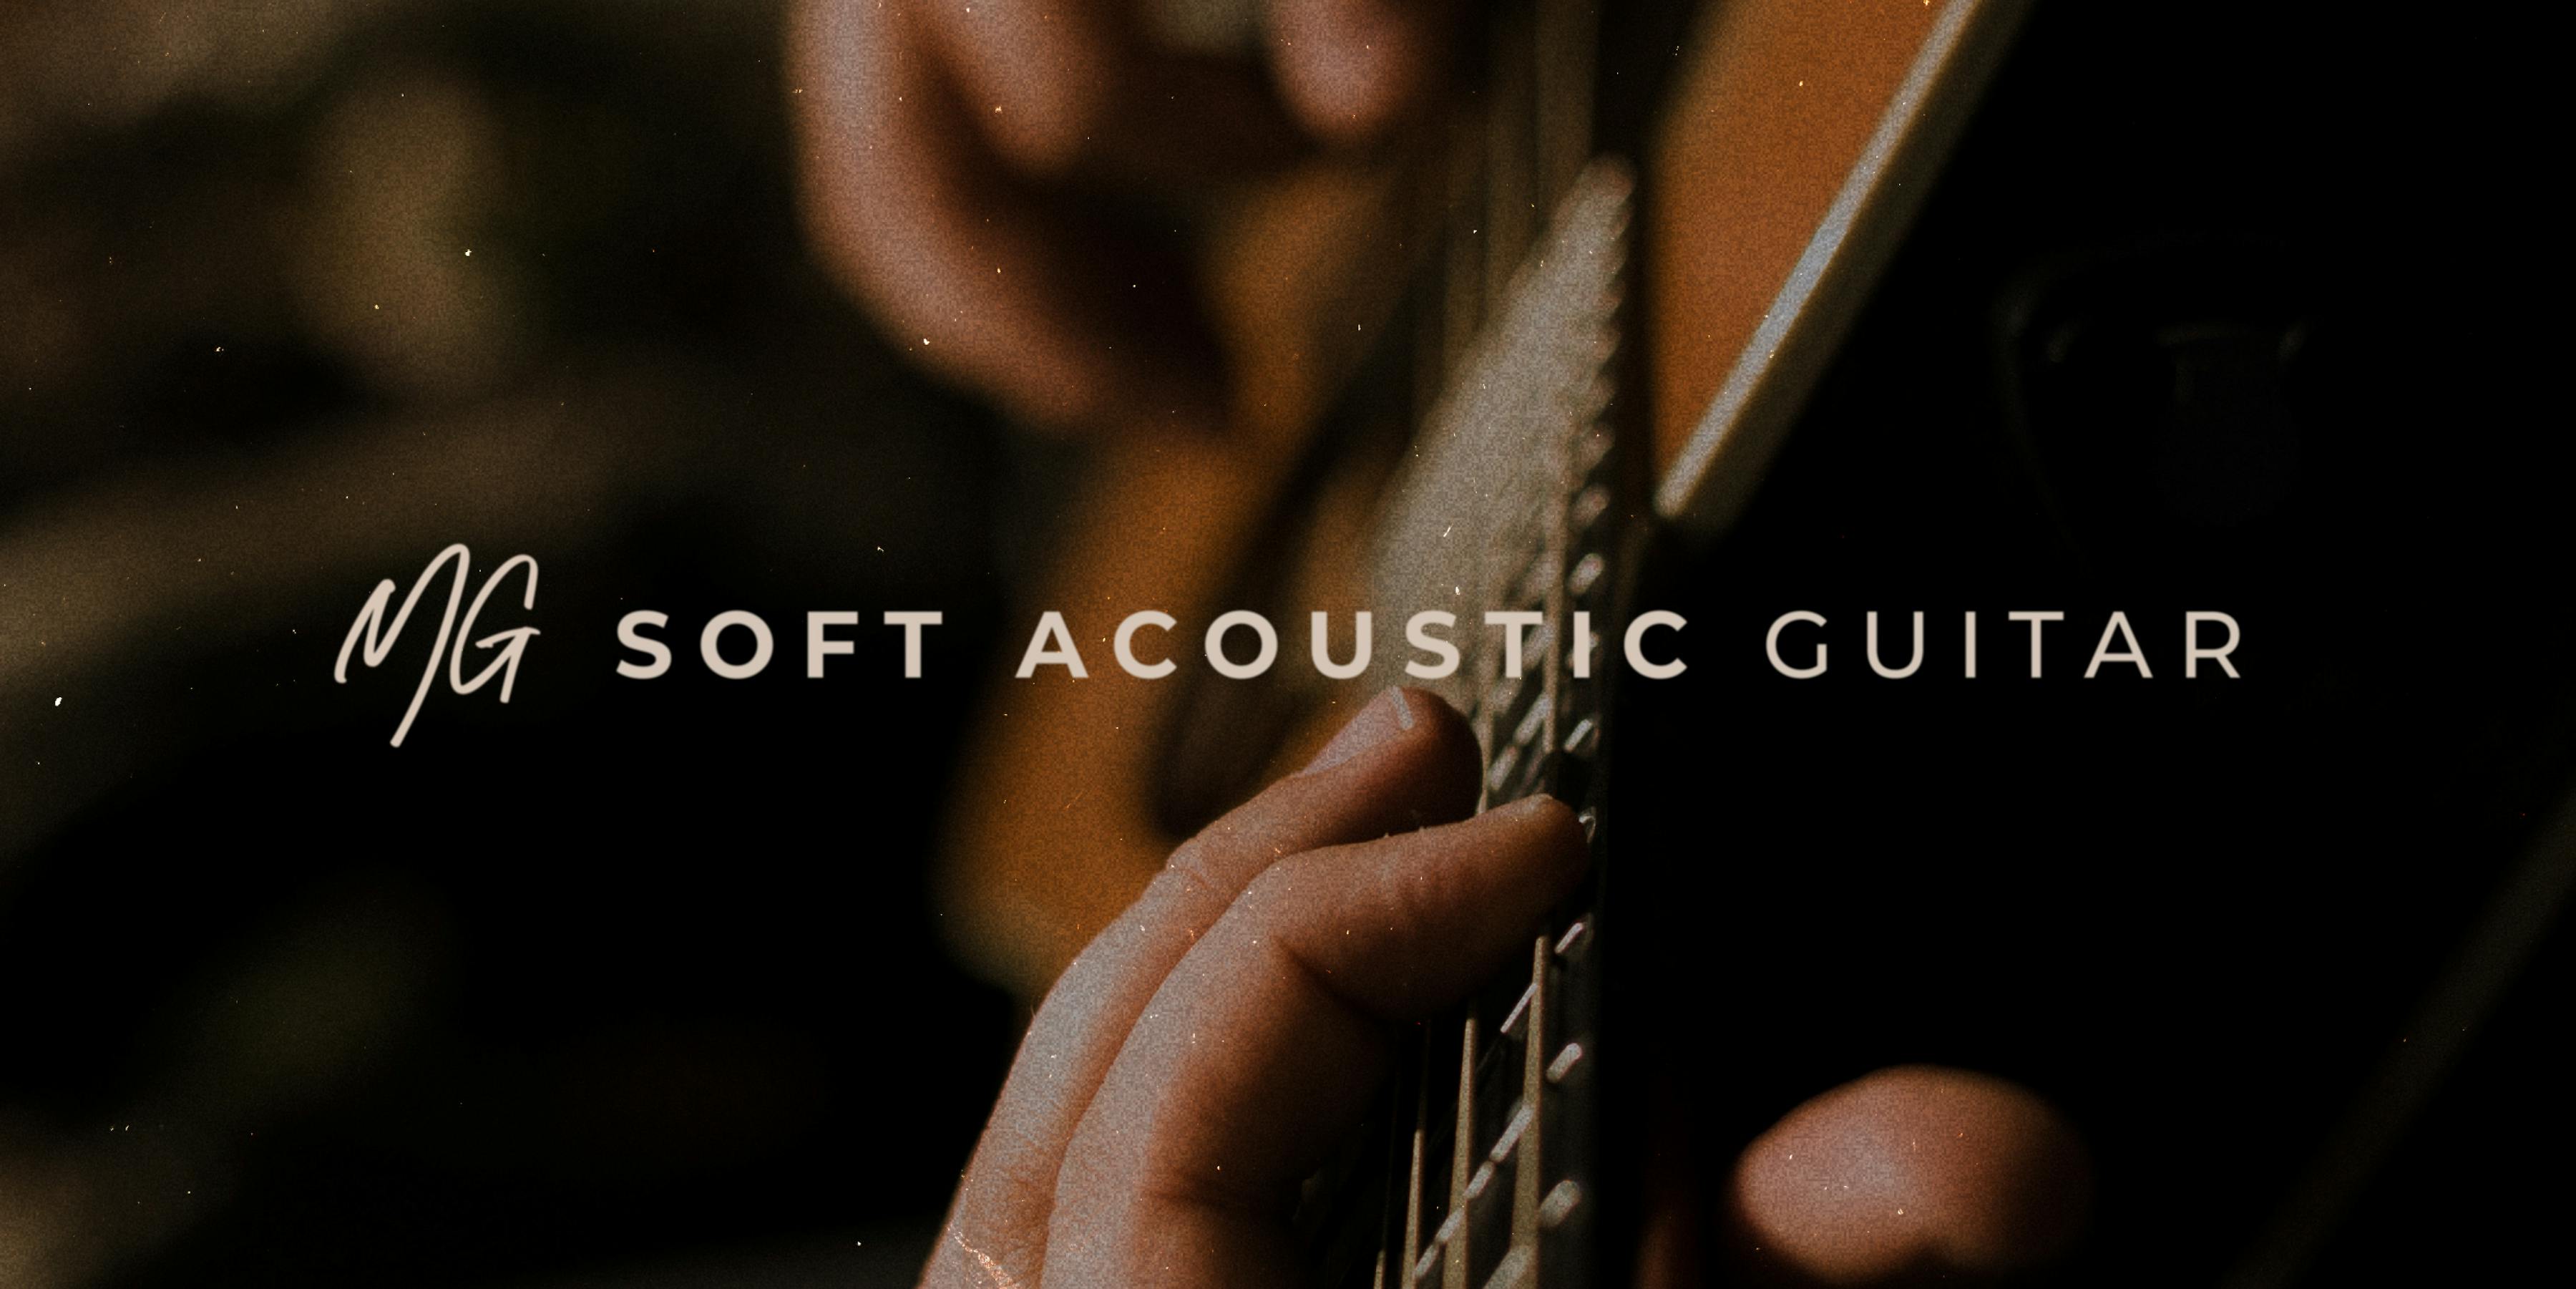 "Soft Acoustic Guitar" and MG signature over blurred guitar neck and hands